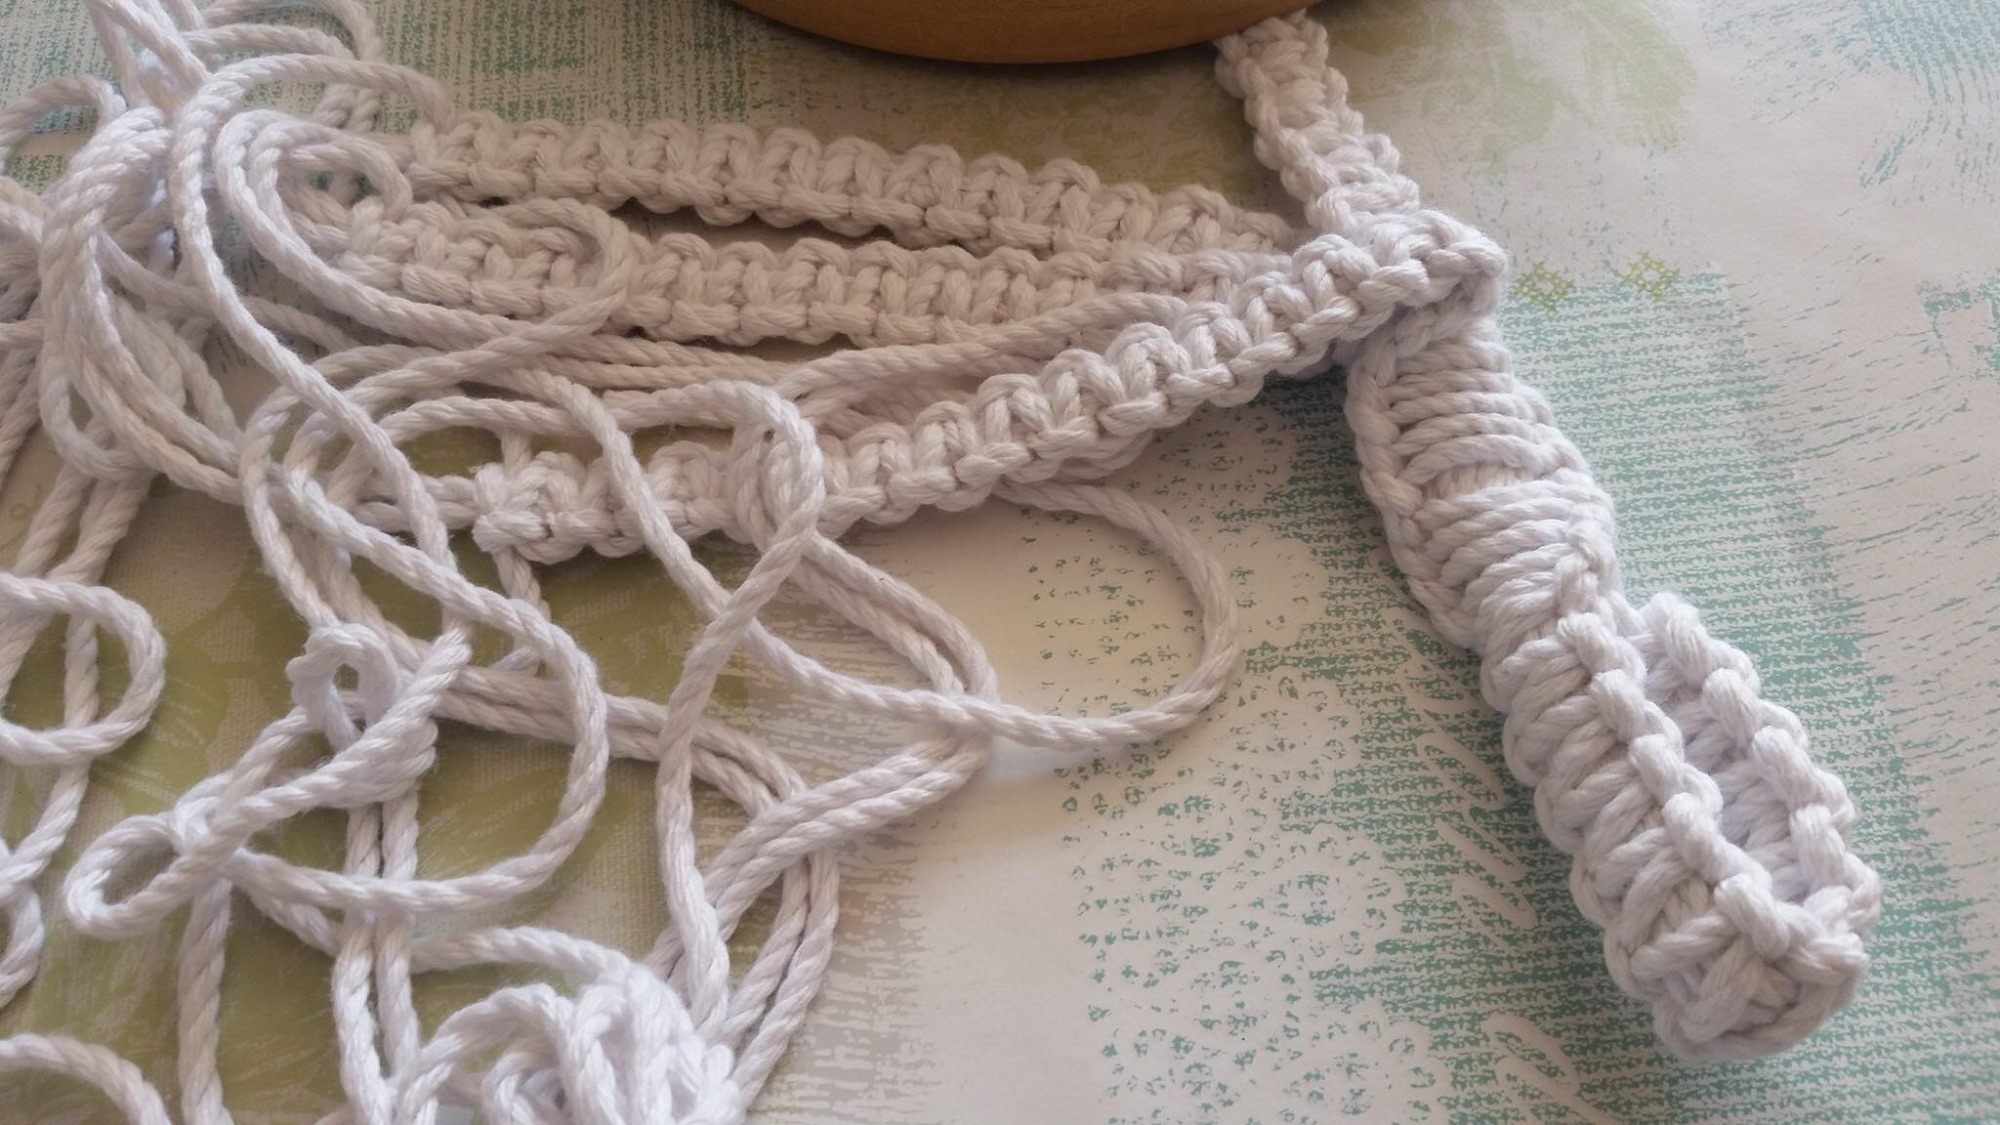 macrame workshops at The Craft Studio in Pewsey